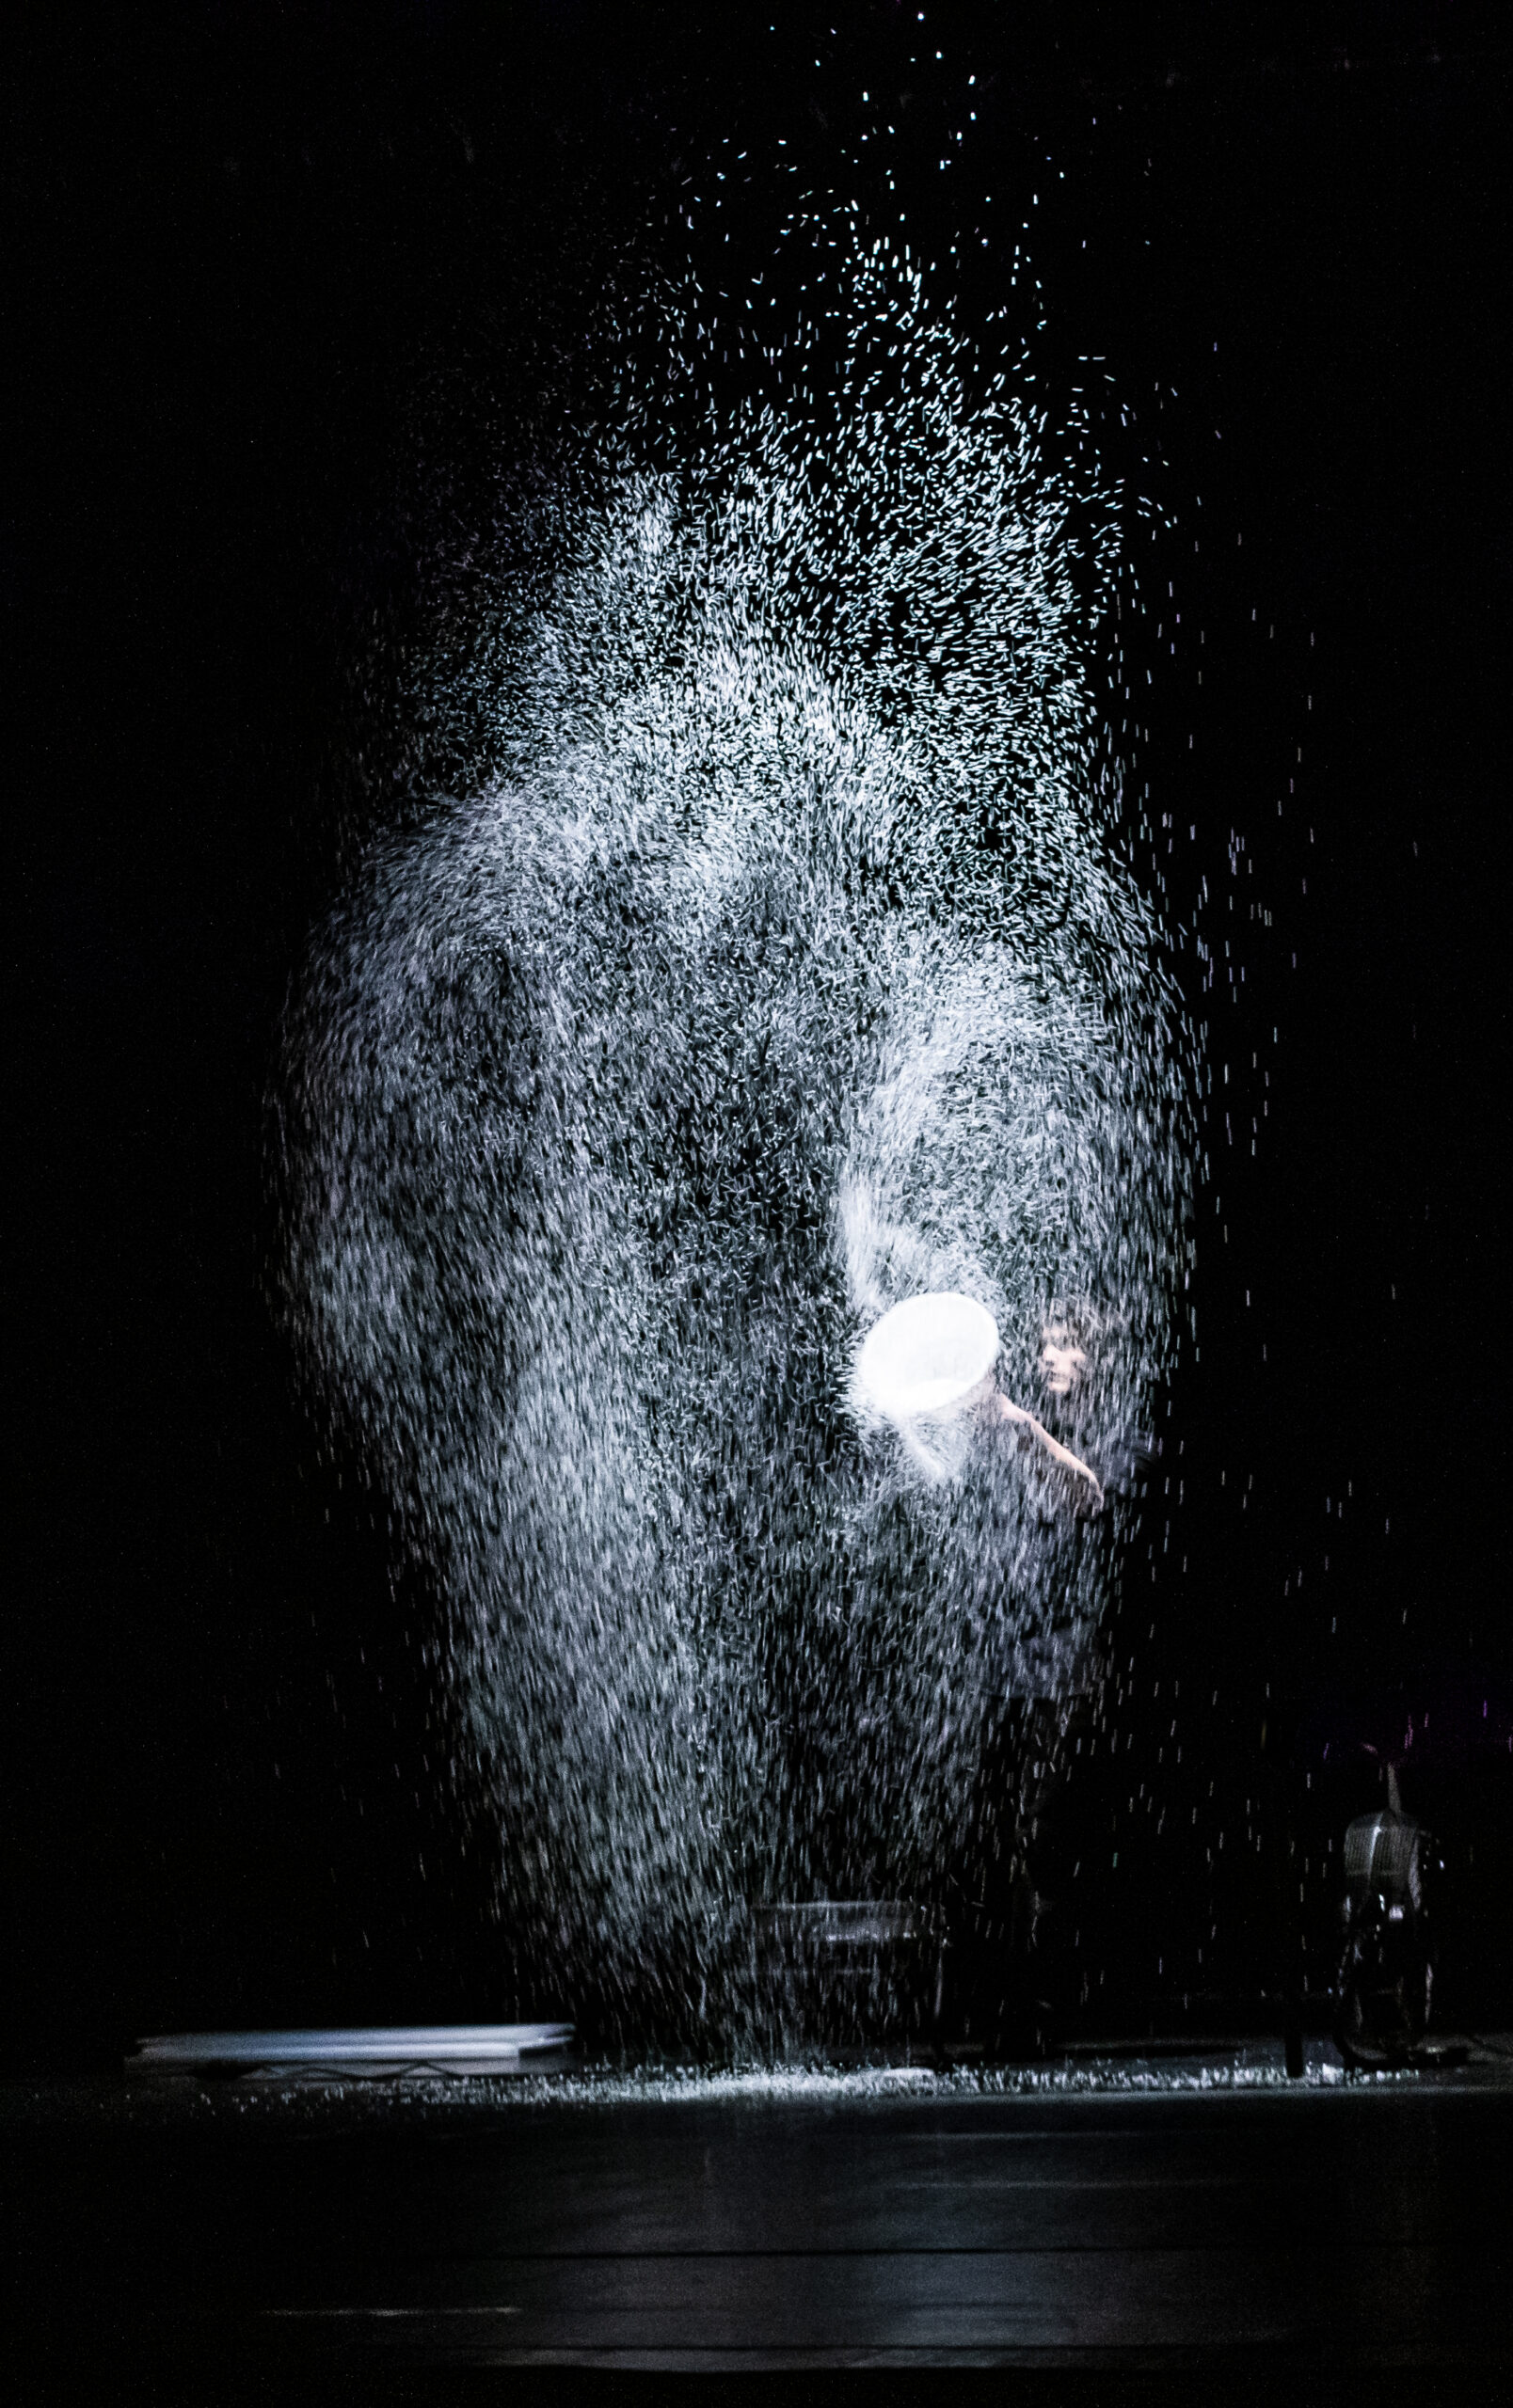 A photo of a person who has created a large cloud of white dust, perhaps polystyrene lit against a stage black out.